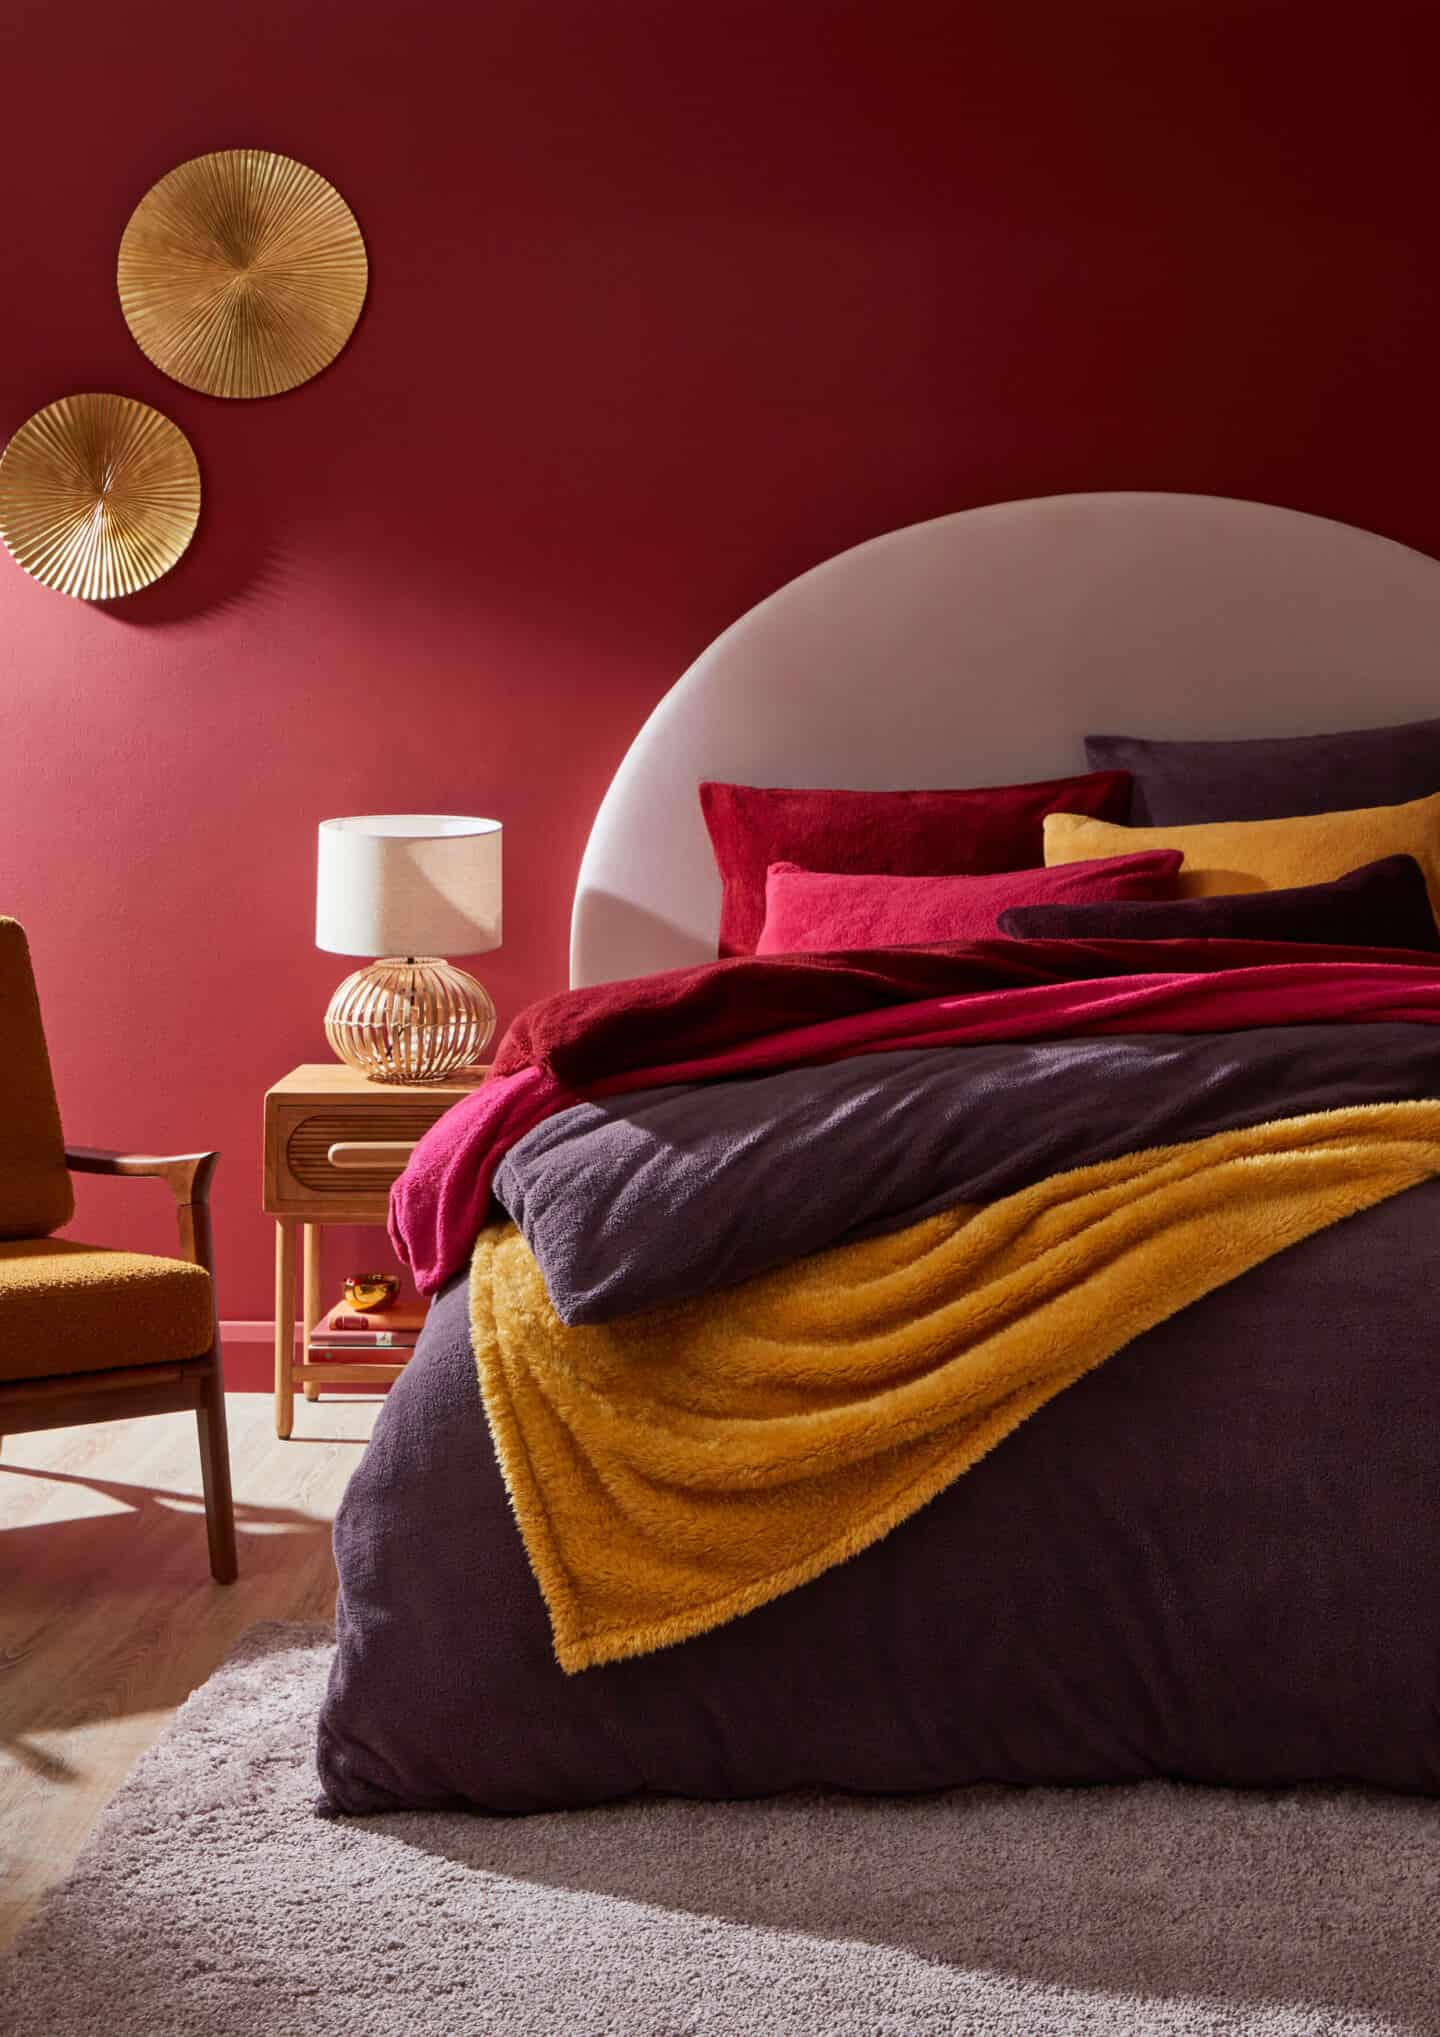 A cosy bedroom with lots of soft teddy bear bedding in purples, deep pinks and ocre yellow